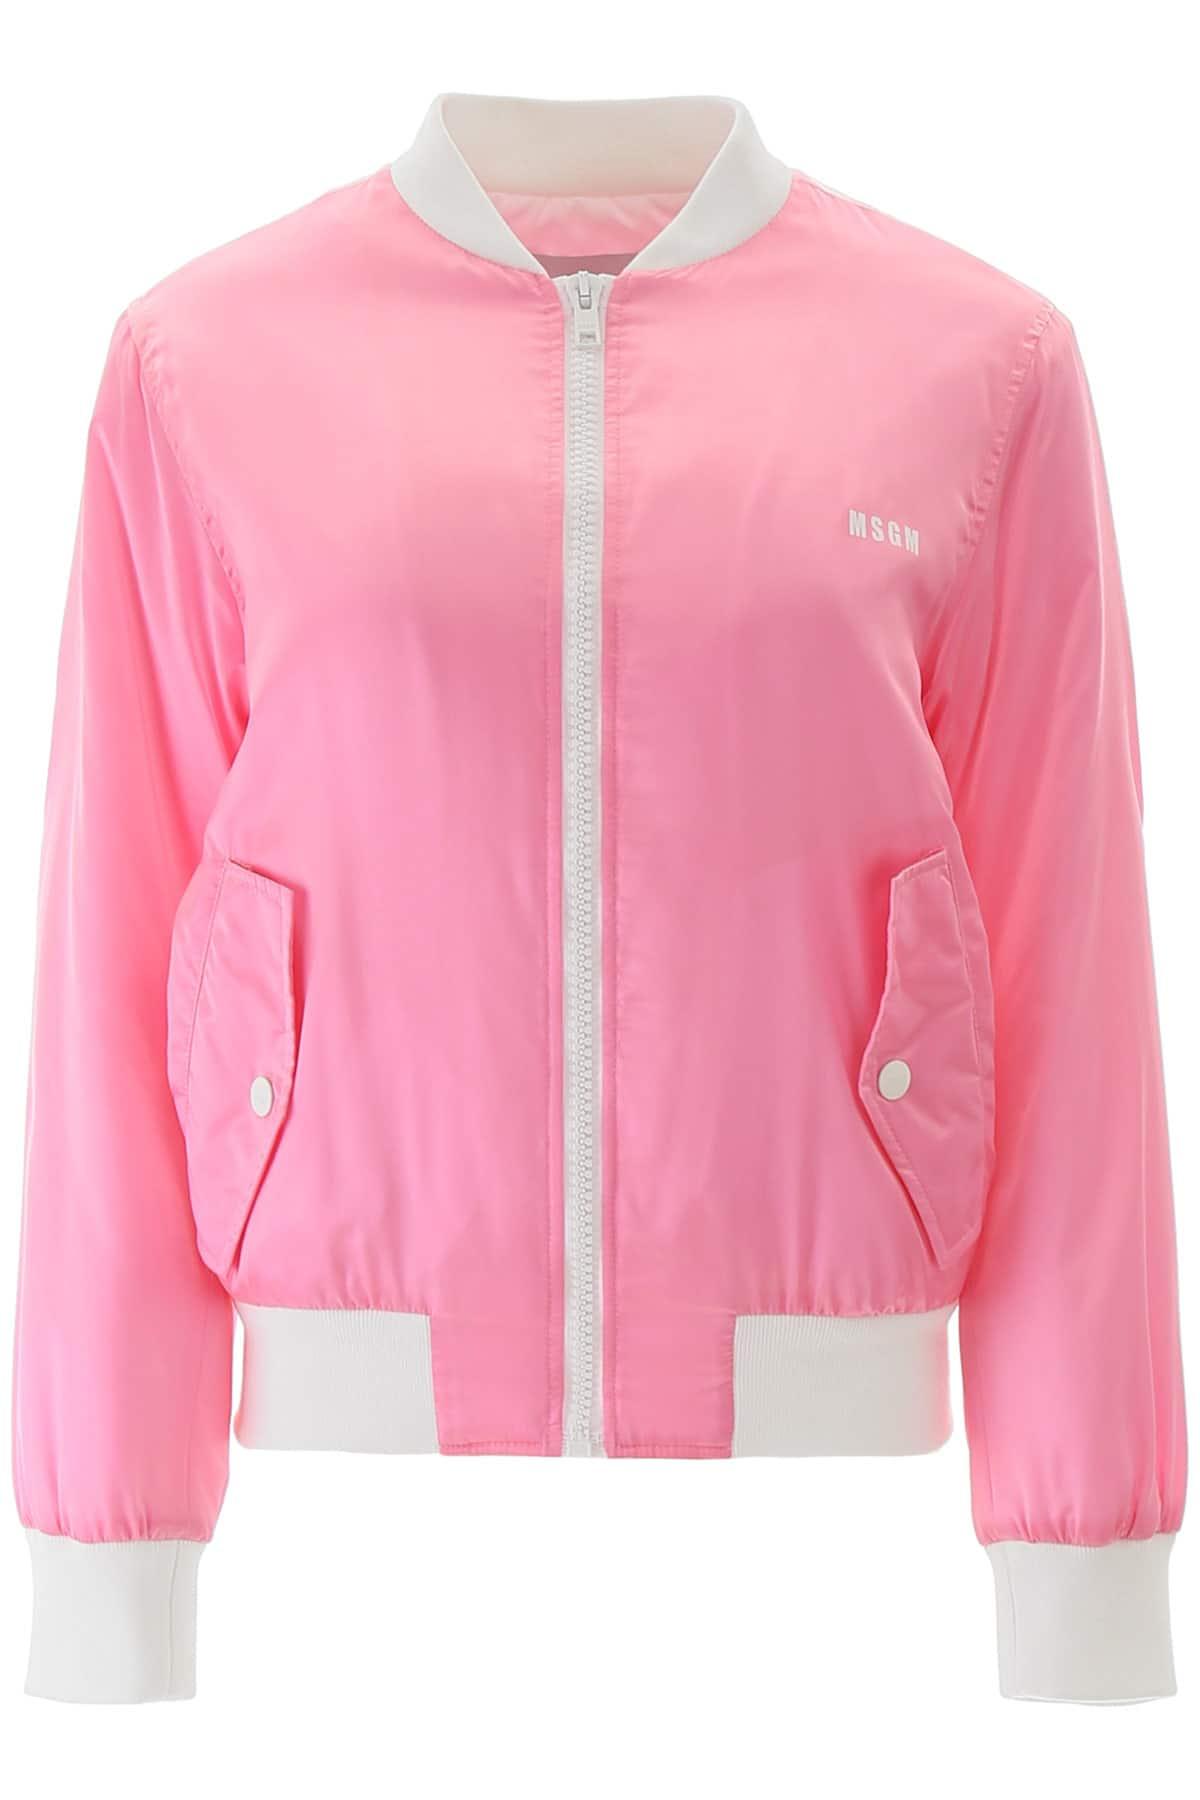 MSGM Satin Bomber Jacket in Pink - Lyst